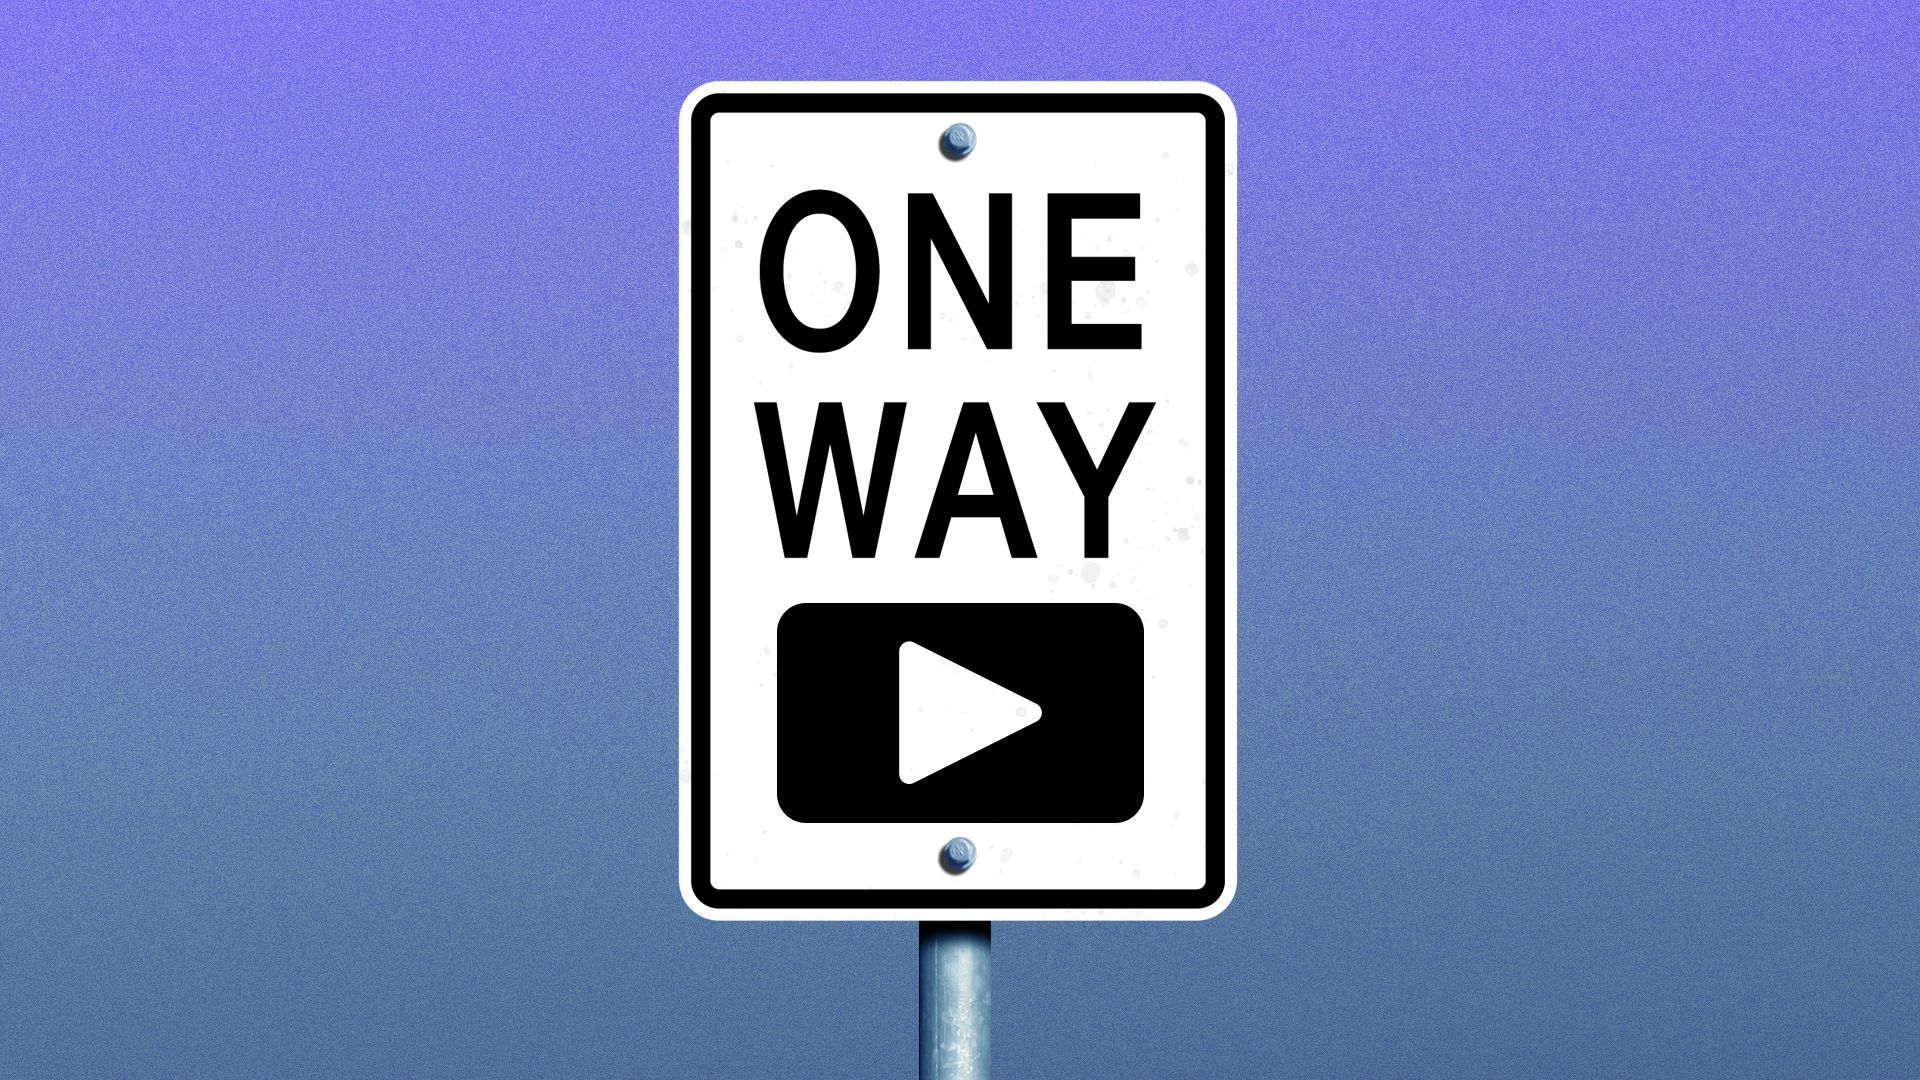 Illustration of a one way sign with a play button instead of an arrow